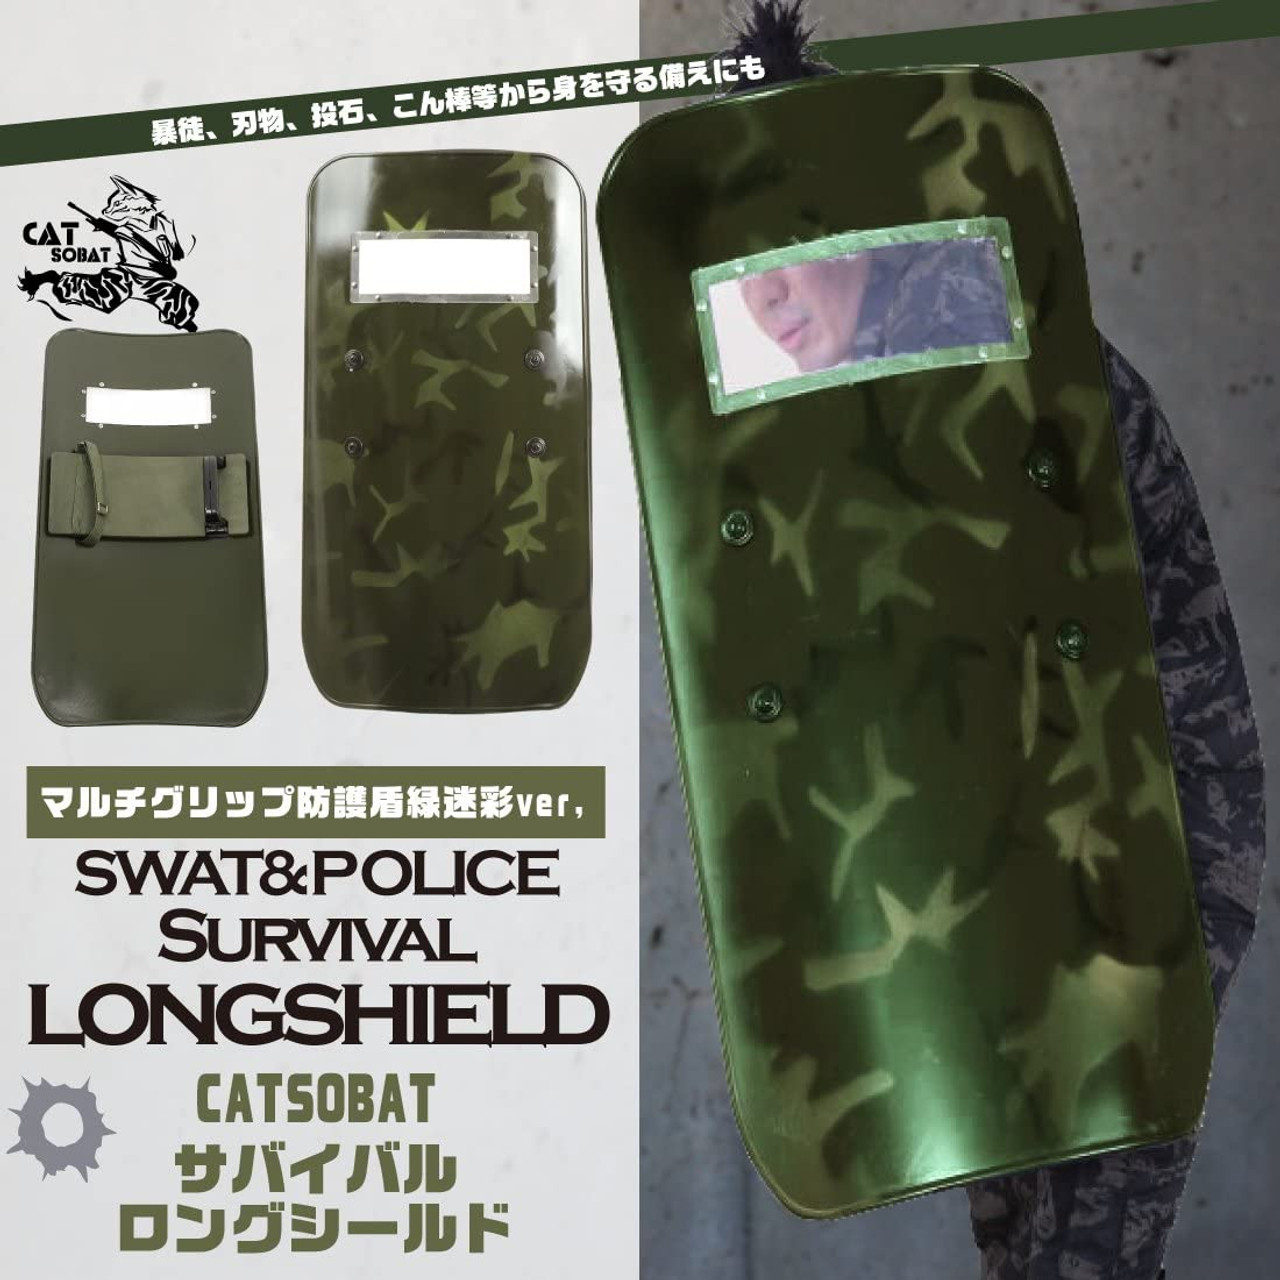 Catsobat long shield multi-grip specification shield police special forces event item green camouflage